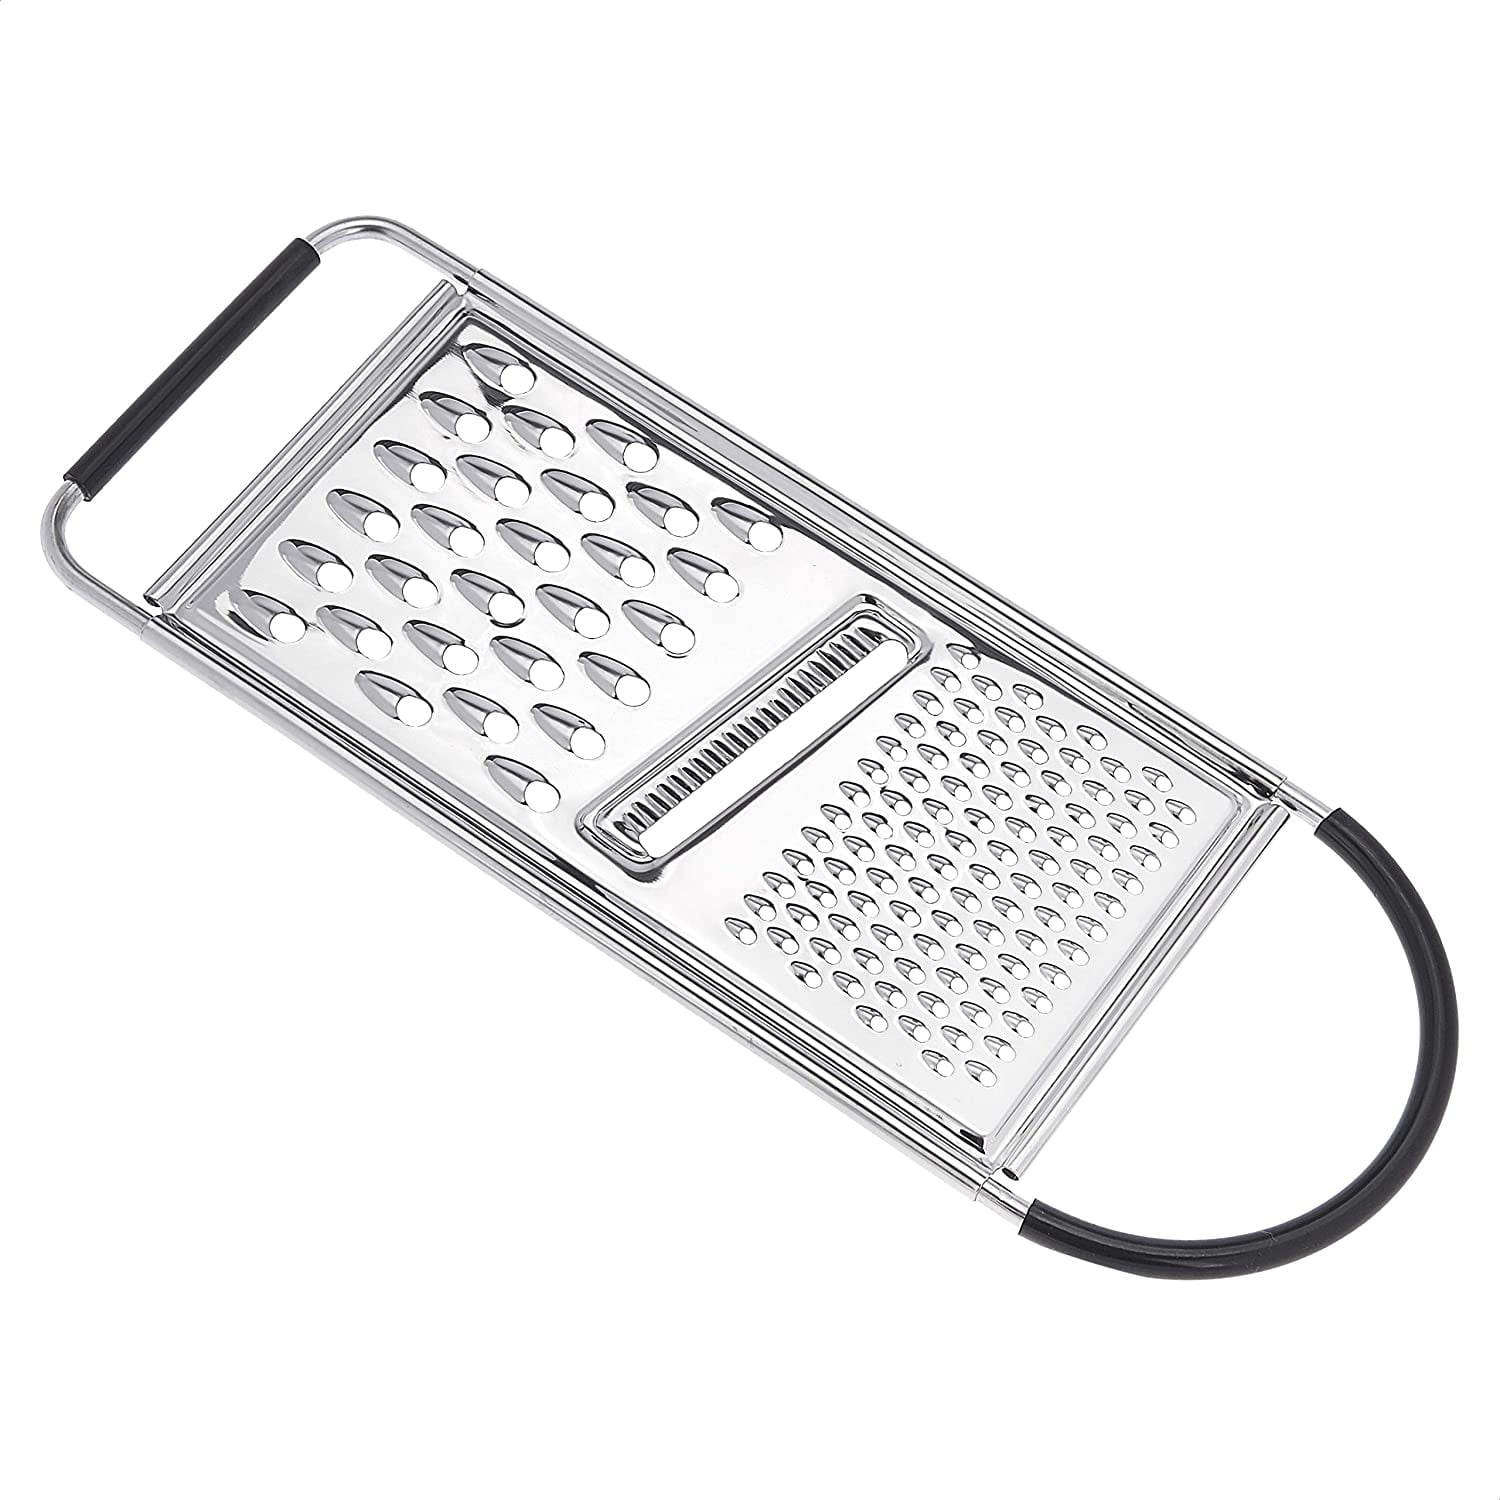 Rectangular Stainless Steel Flat Cheese Grater with Non-Slip Handle and Base, Black